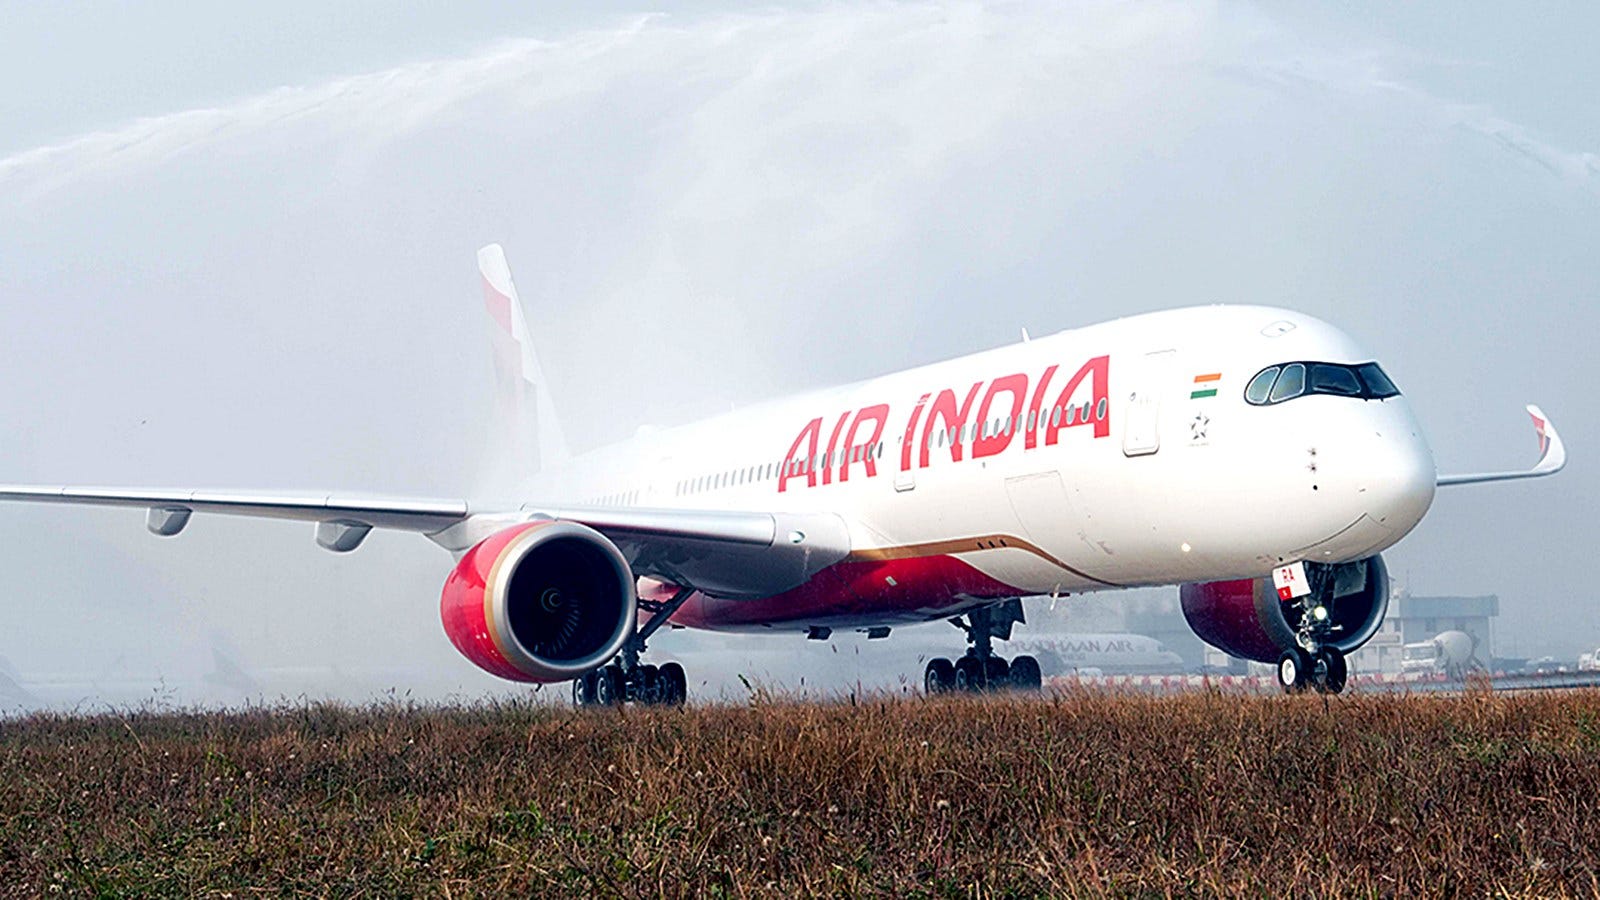 Air India Soared into the Future with Tech Upgrade Powered by Gen AI